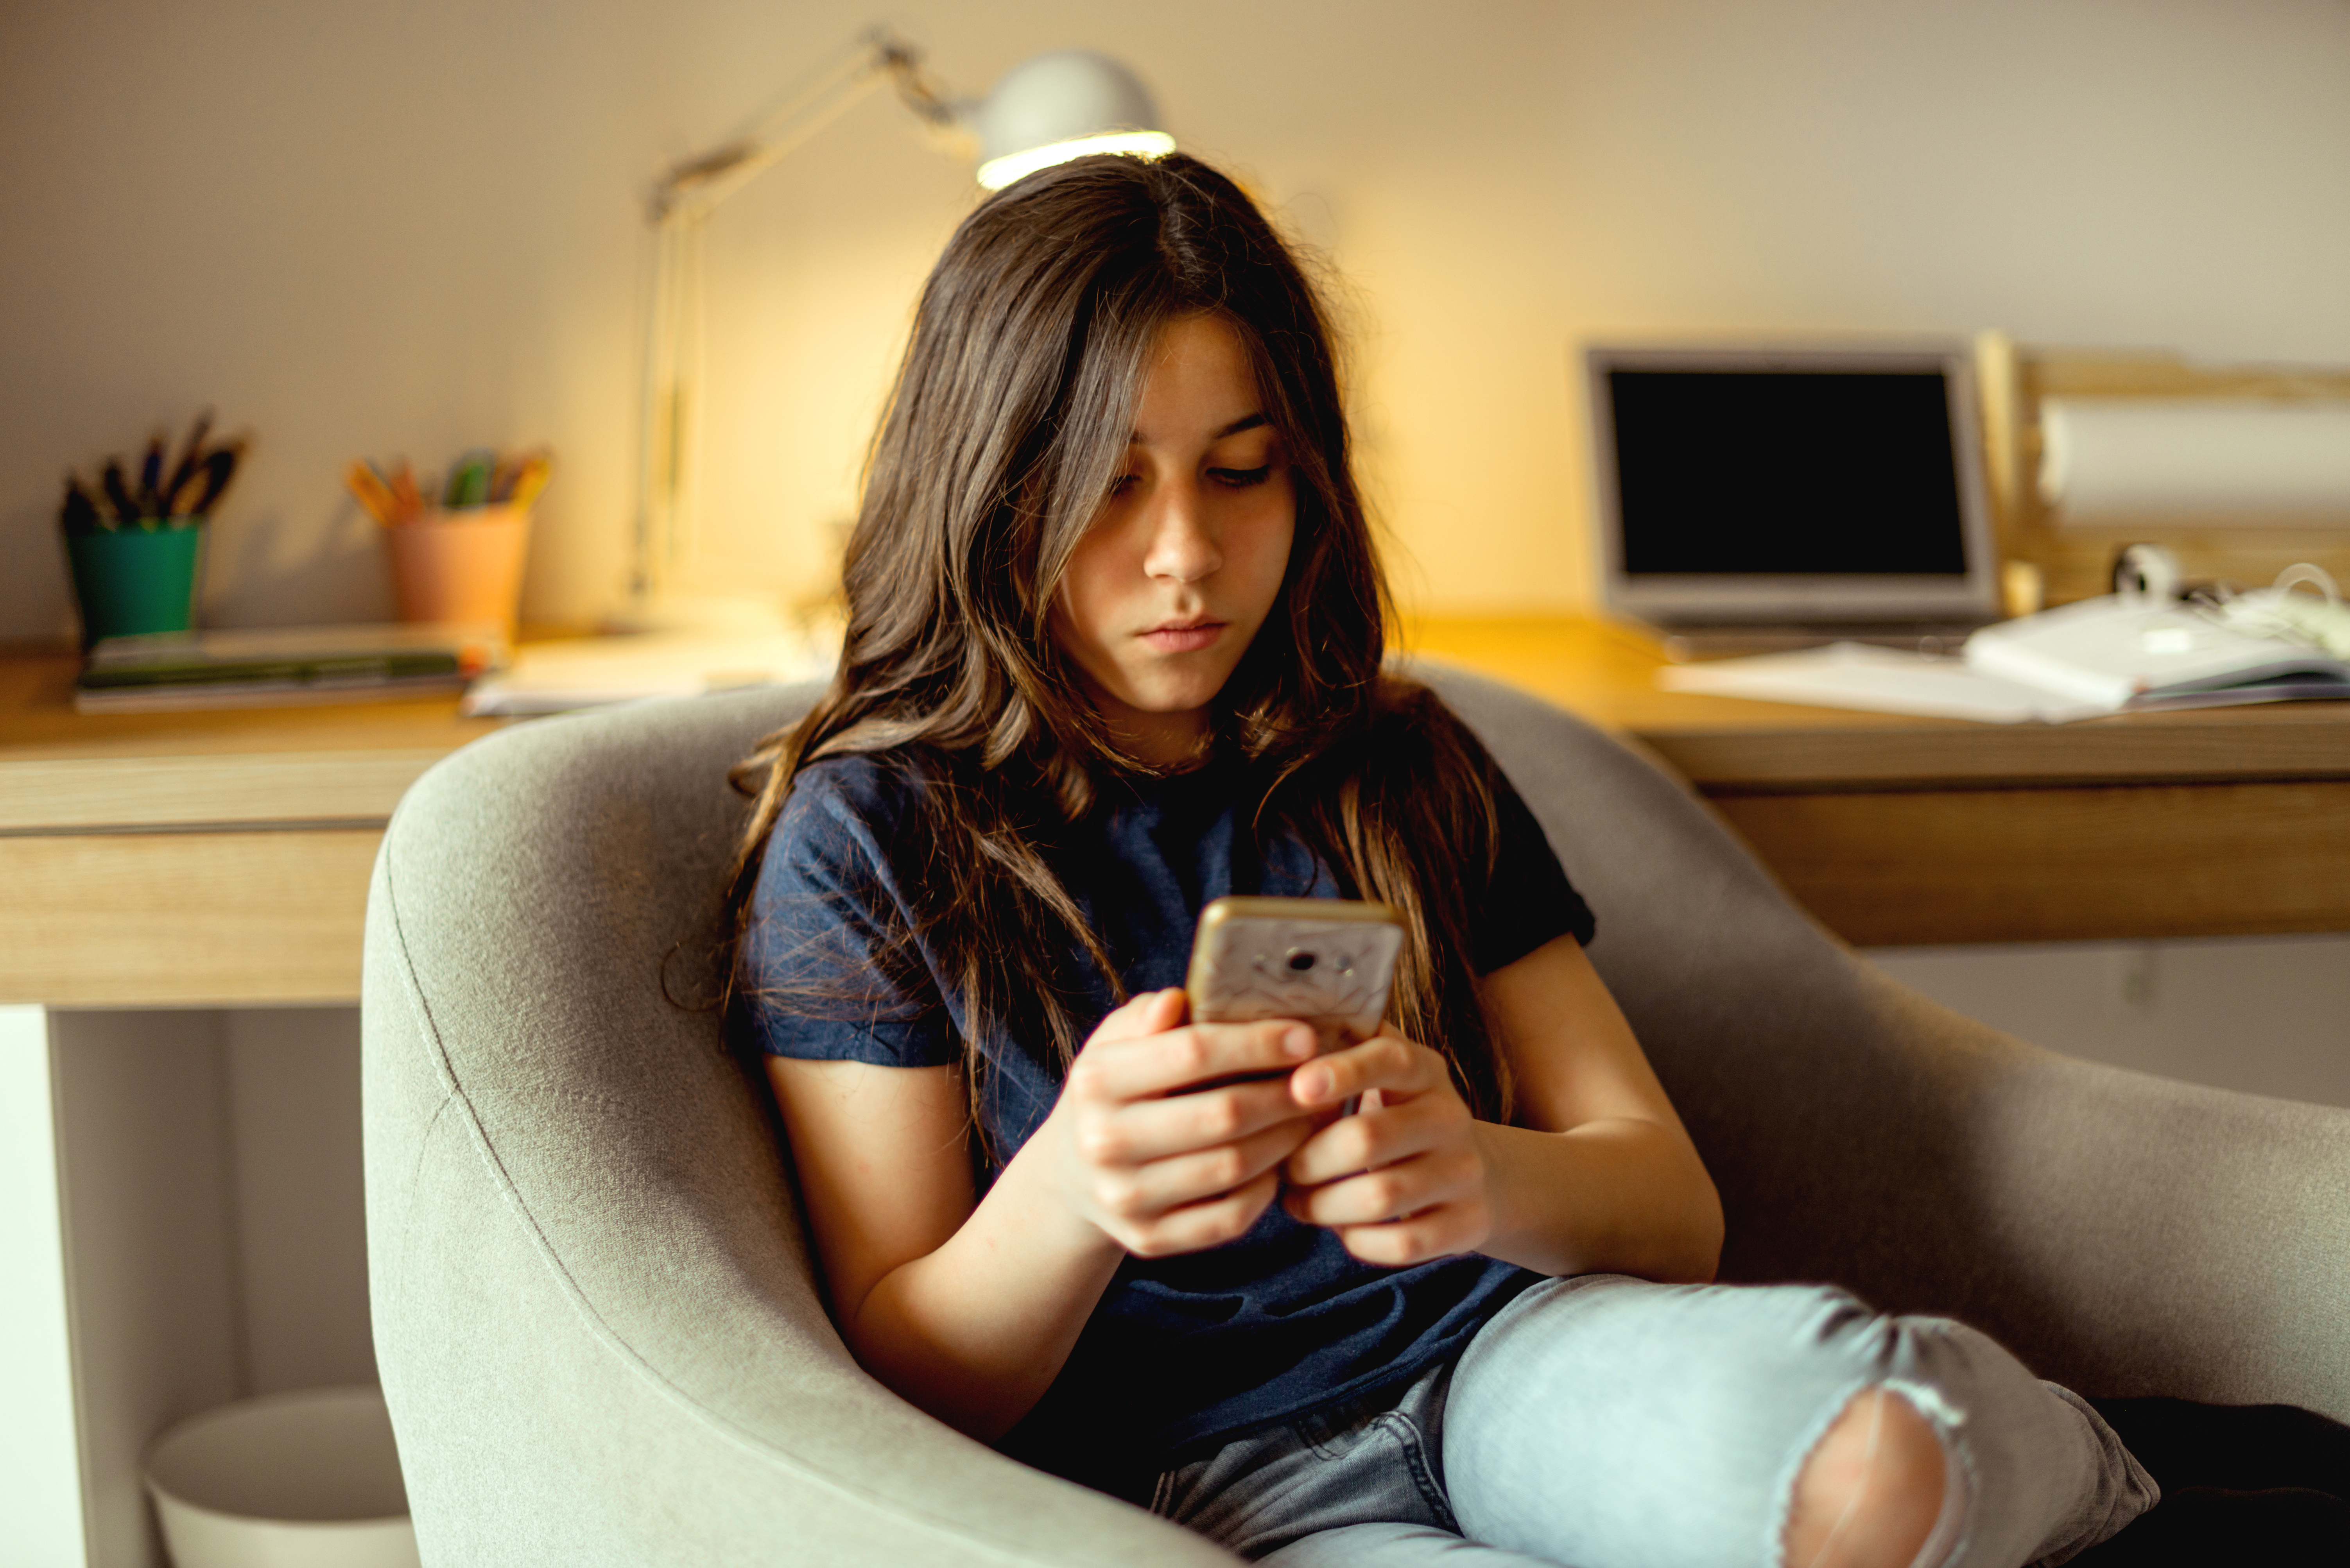 Female-presenting teen sitting in chair and looking at cell phone